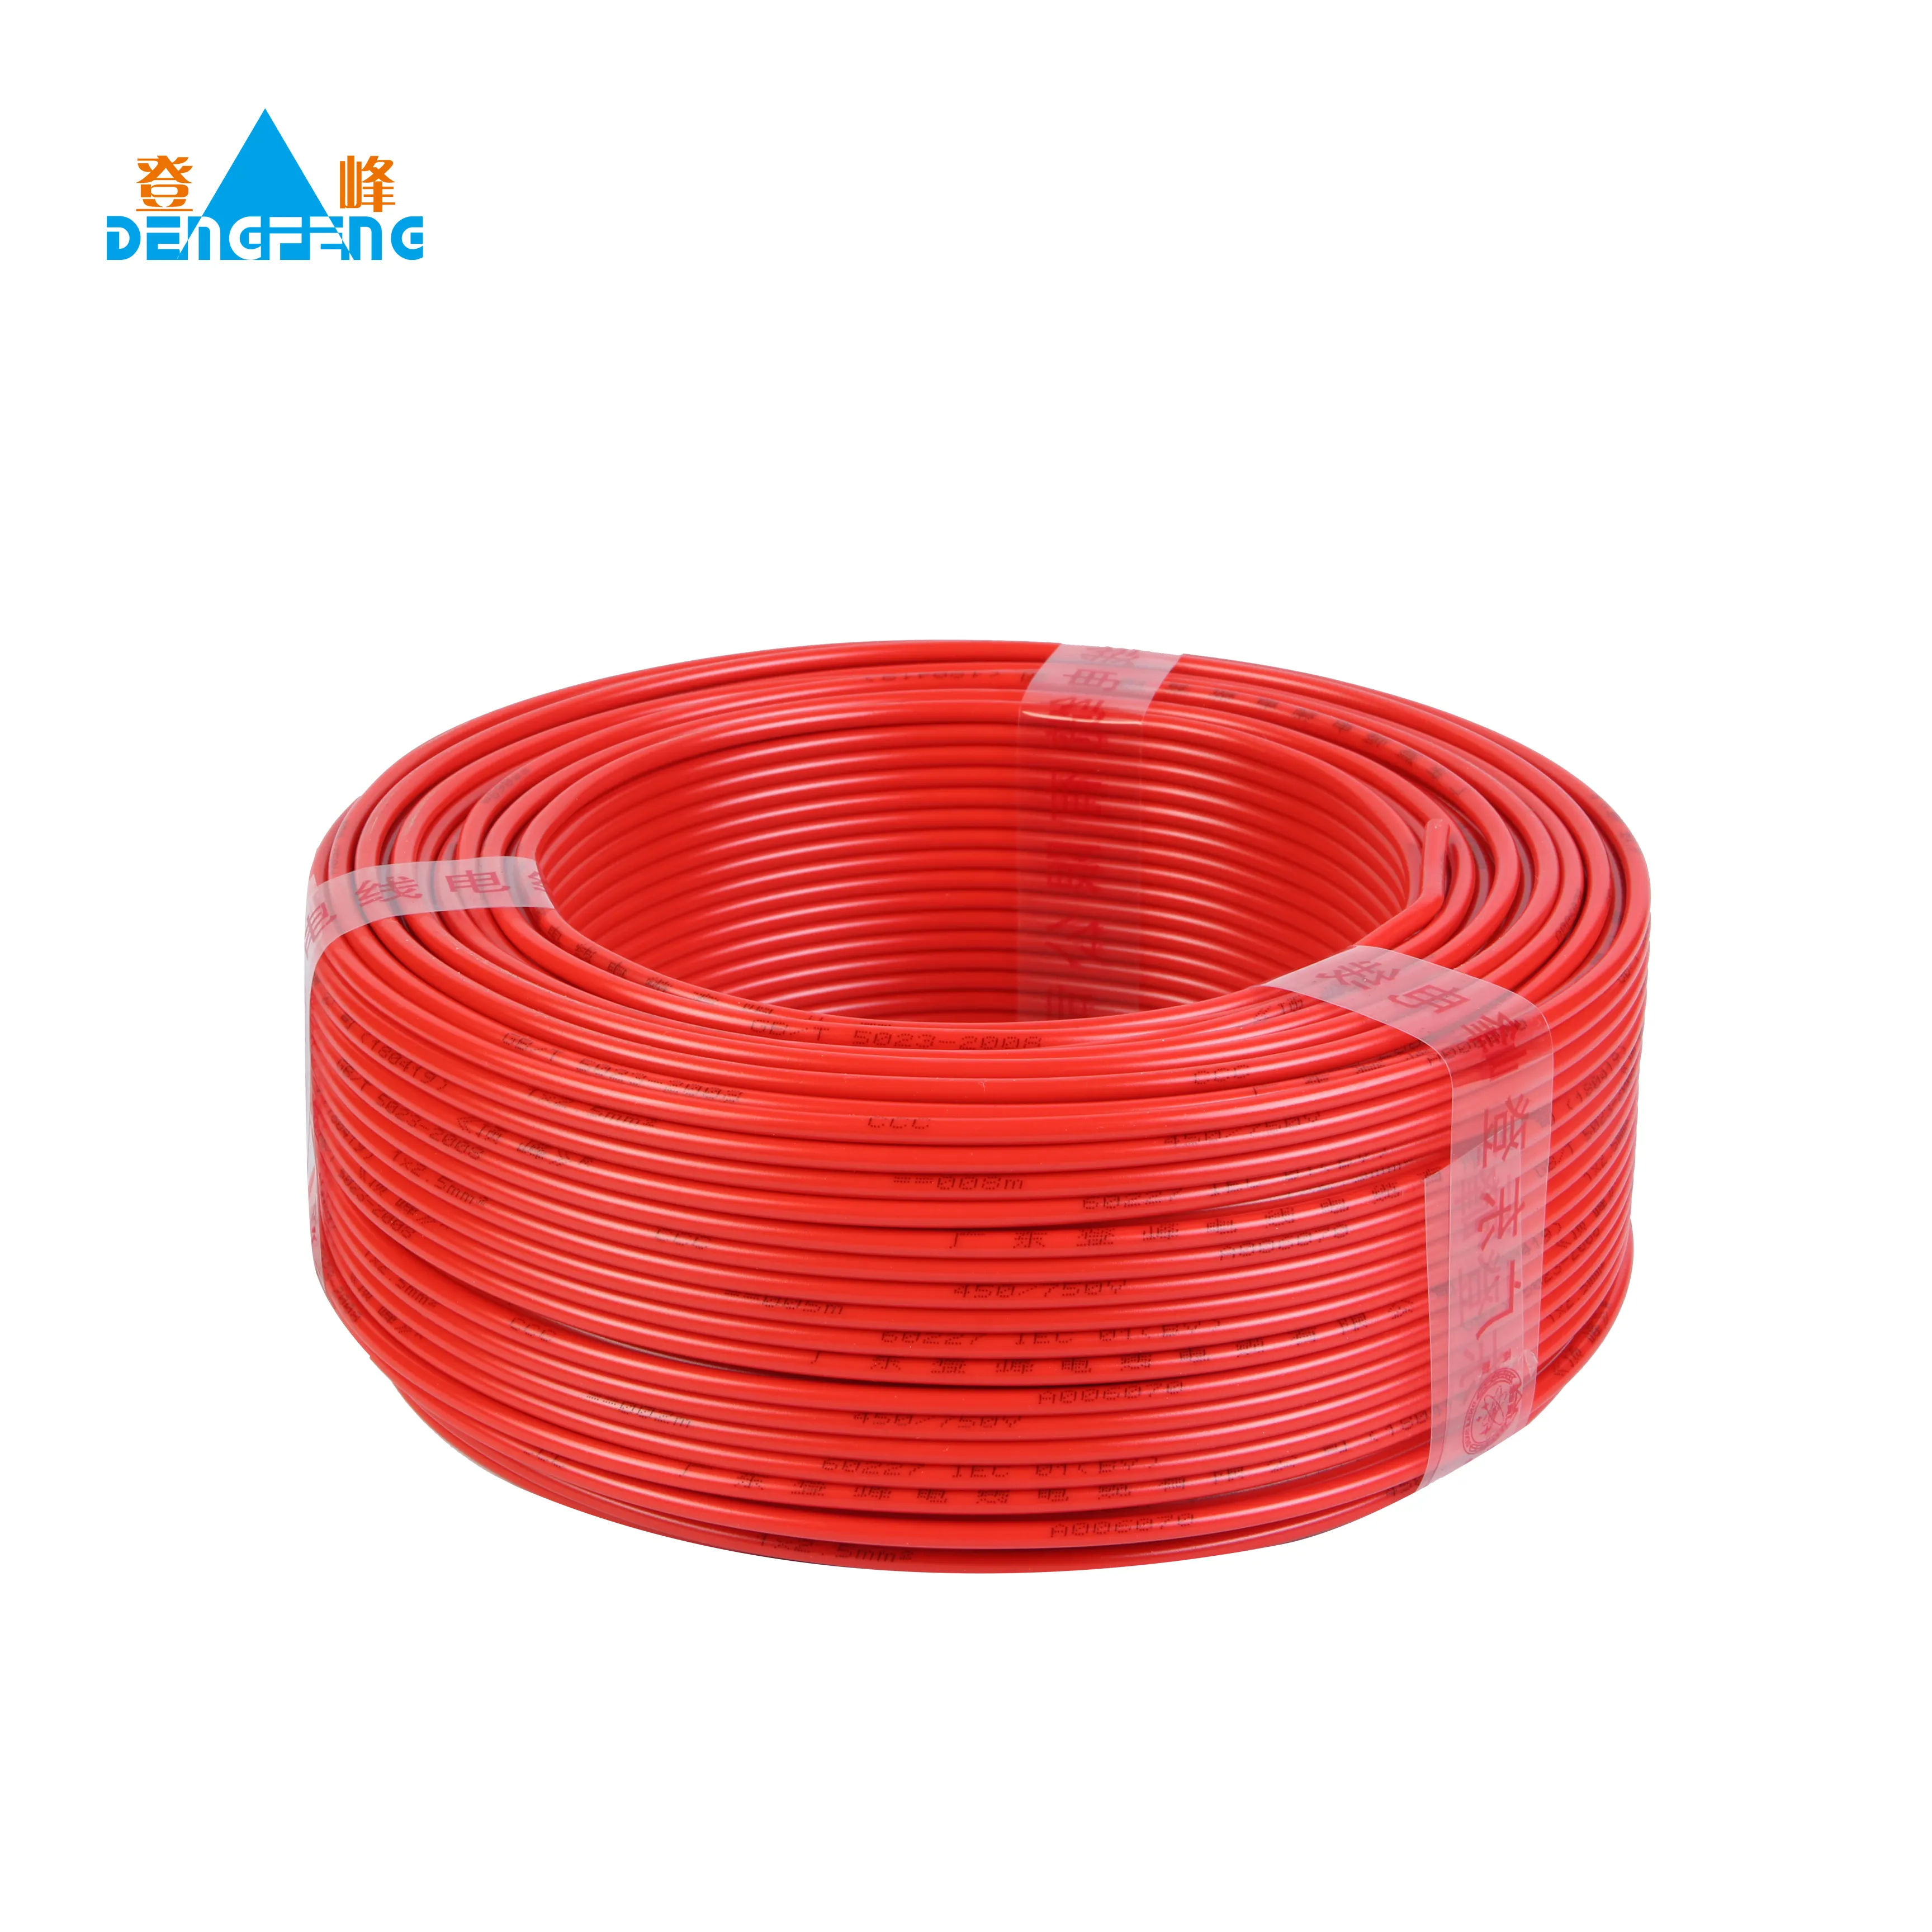 BVR 6mm2 Household wiring bv/bvr 1.5mm 2.5mm 6mm electrical wire prices 19 Strands copper wire BVR 6mm cable 450V/750V PVC